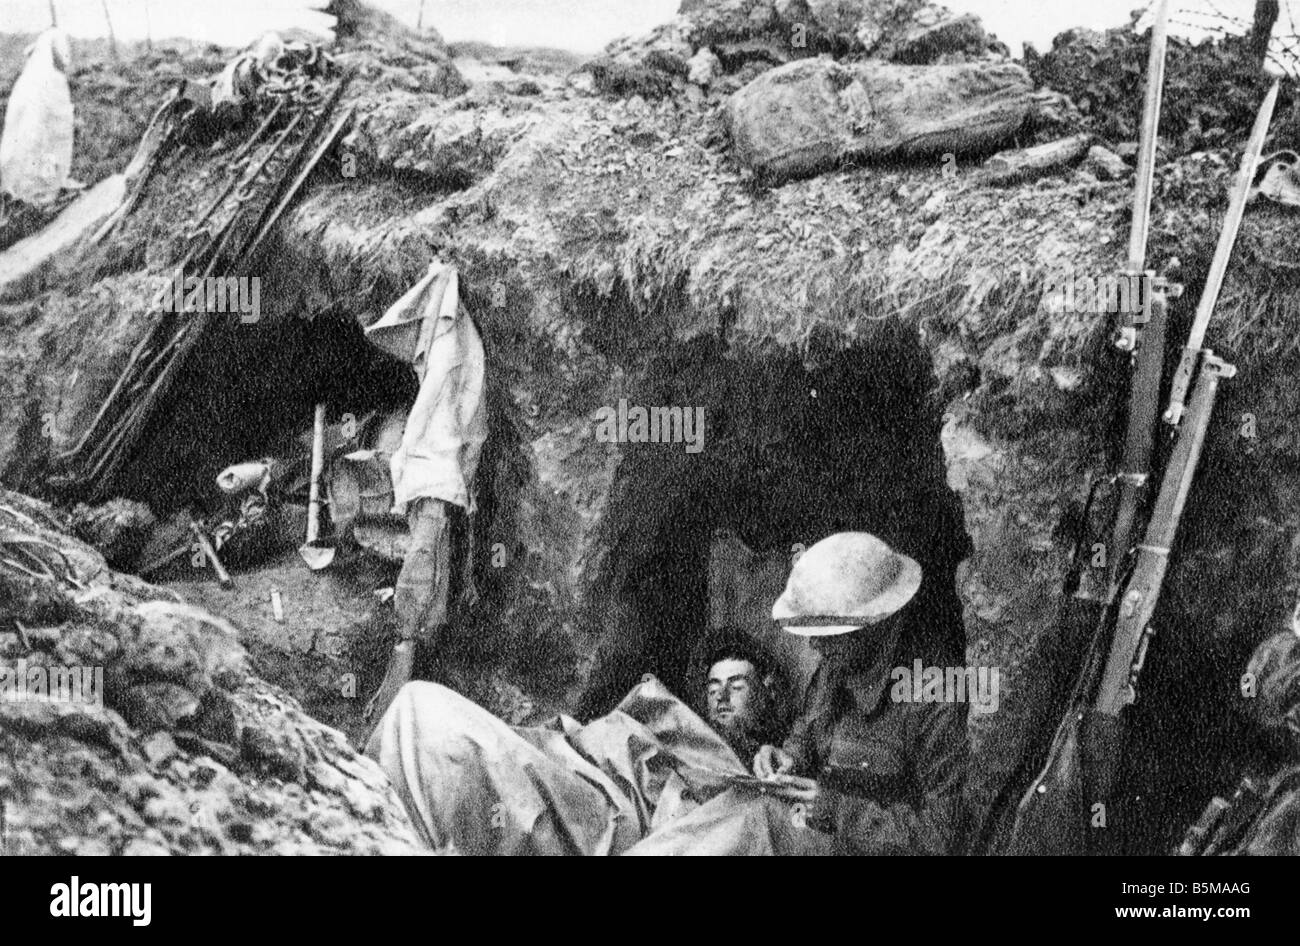 British soldiers in trench WWI 1915 History World War I Western Front Trench warfare British soldiers in a trench Photo c 1915 Stock Photo